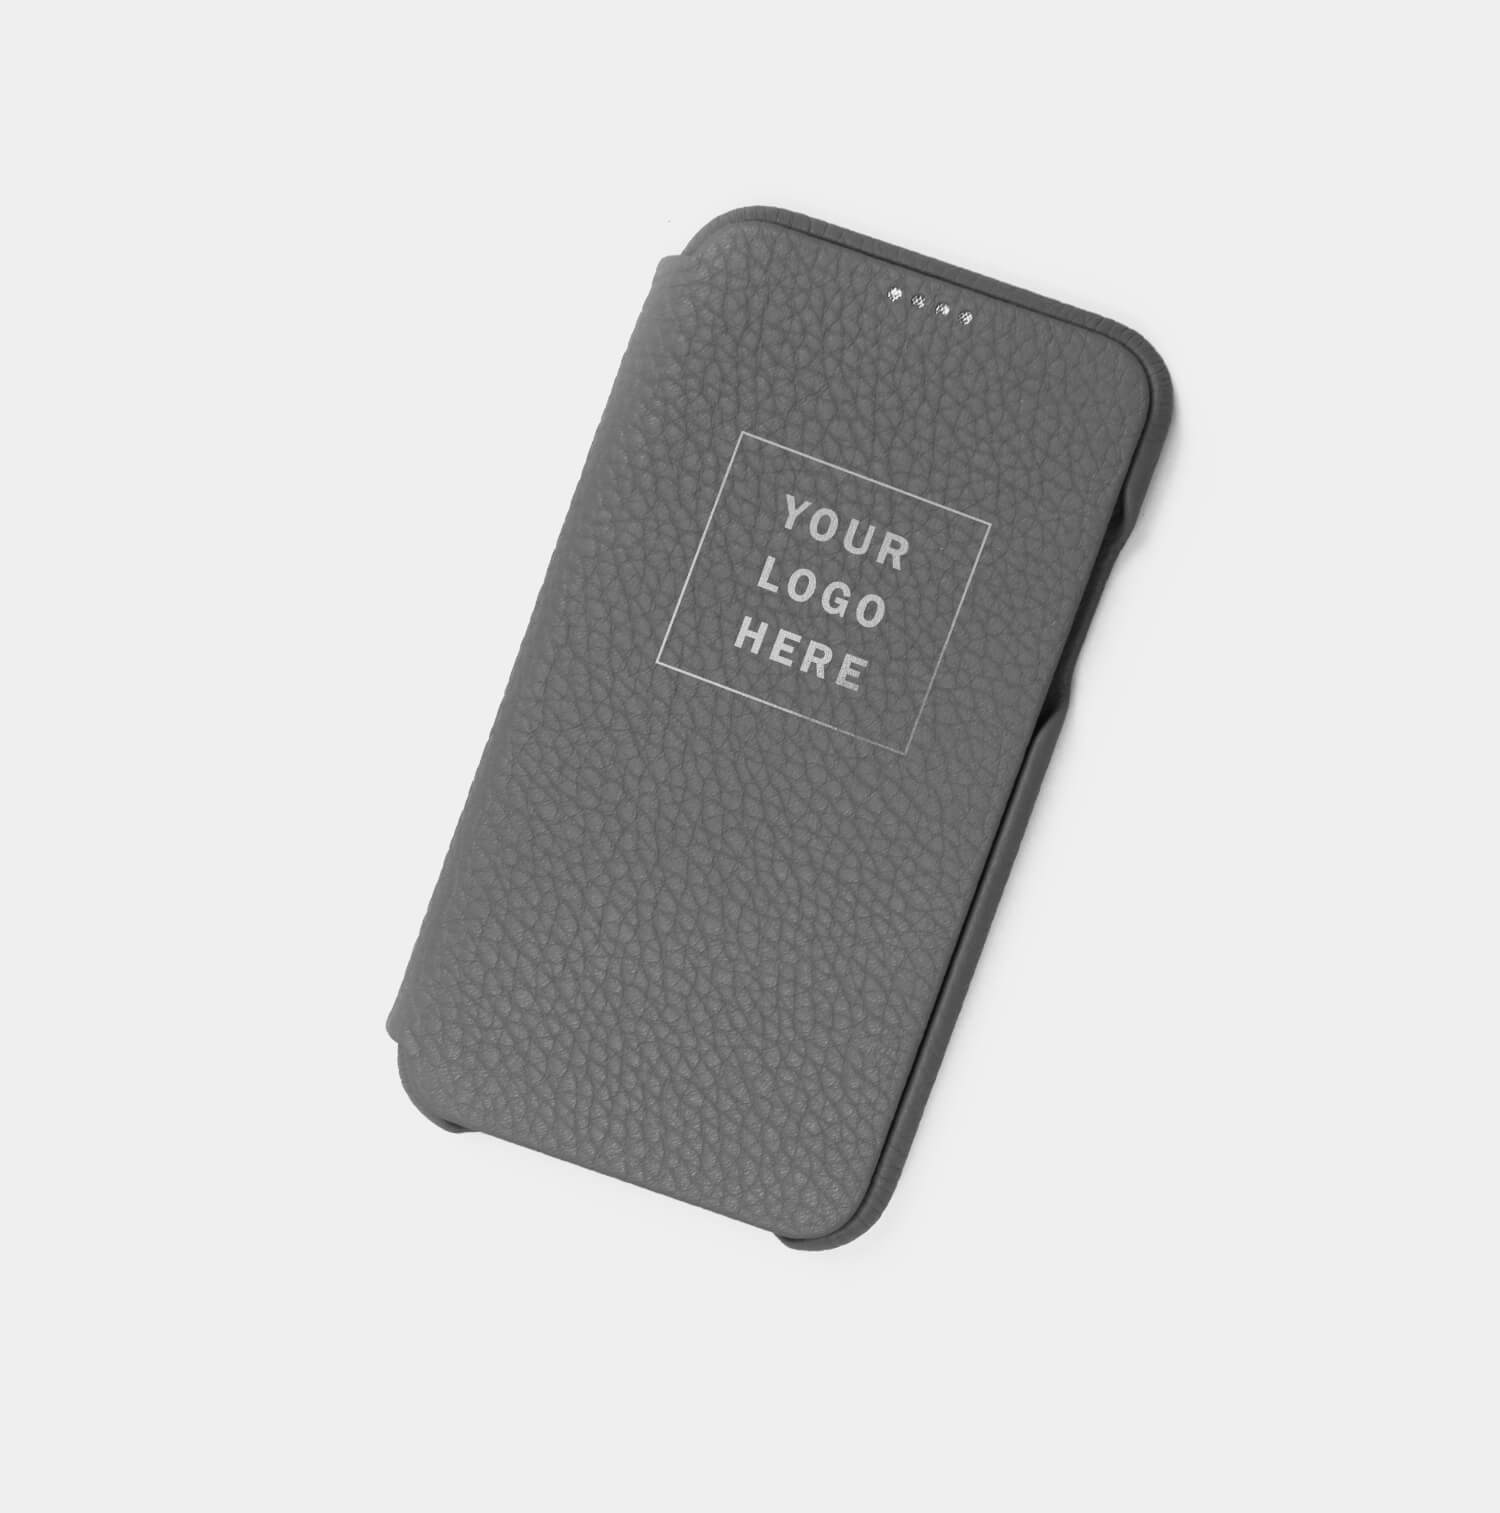 Pebble grain leather phone flip over screen cover and case to protect the phone for all models with two card slots